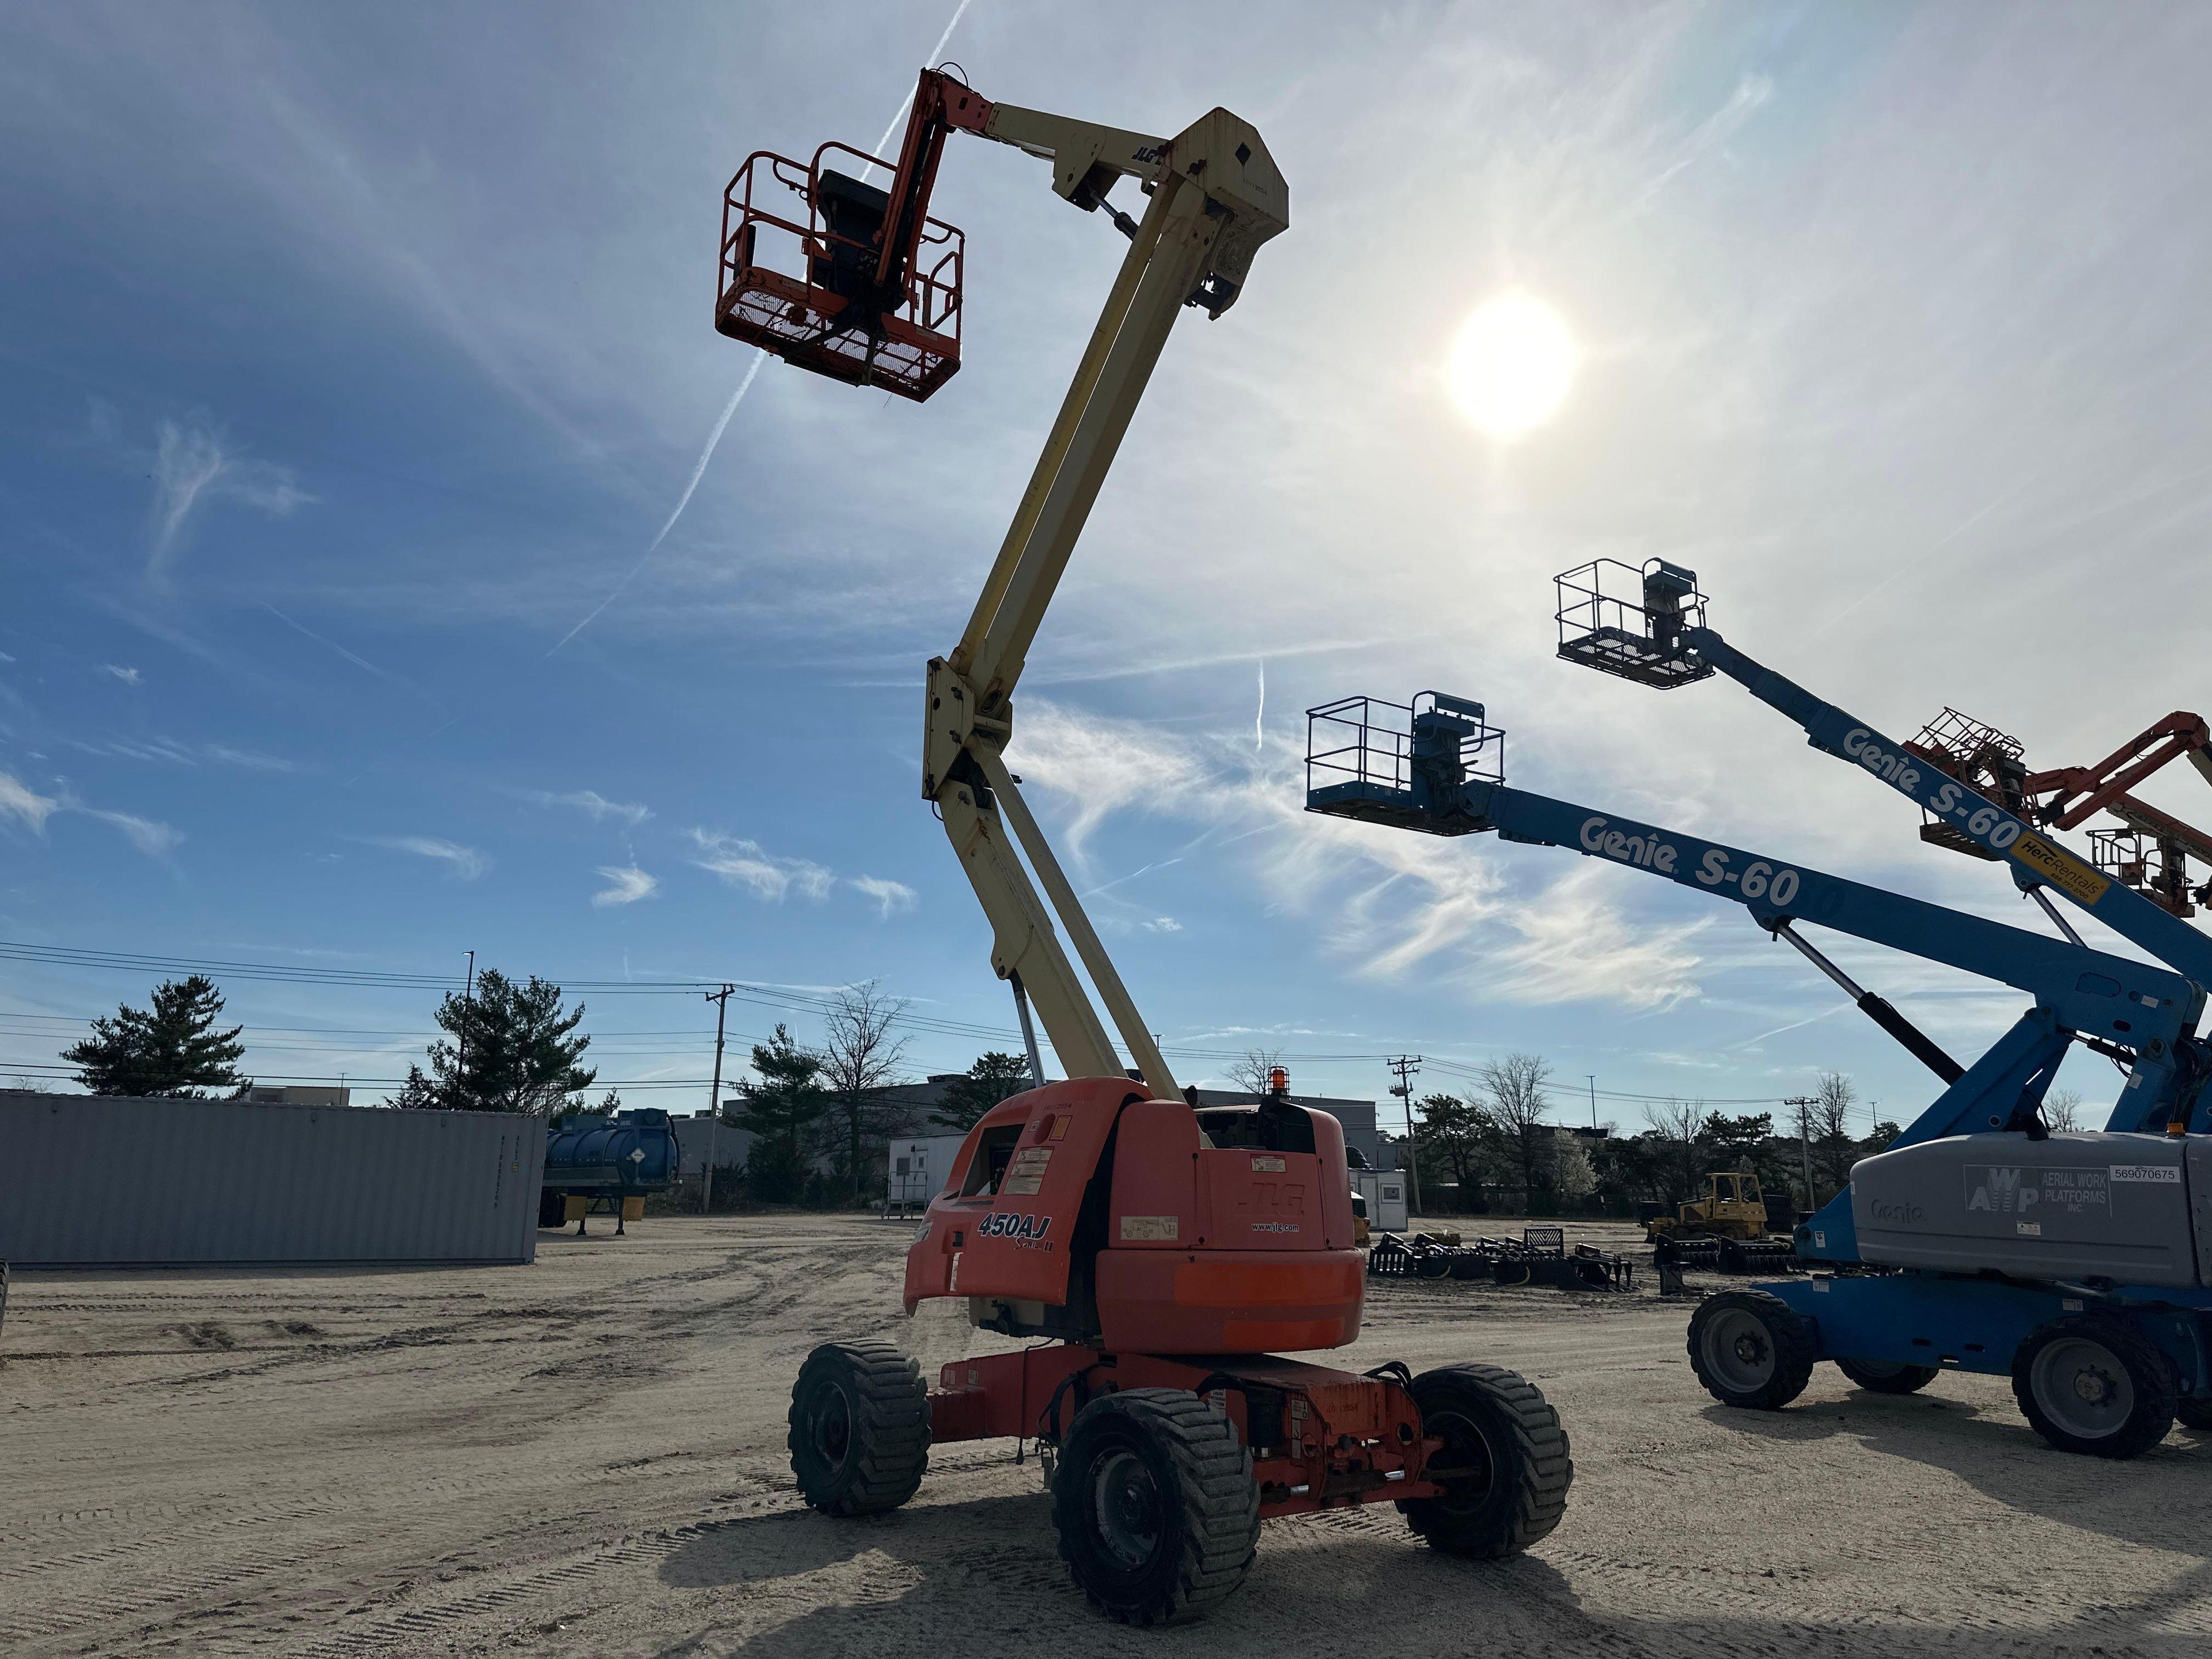 2013 JLG 450AJ BOOM LIFT SN:300168369 4x4, powered by diesel engine, equipped with 45ft. Platform